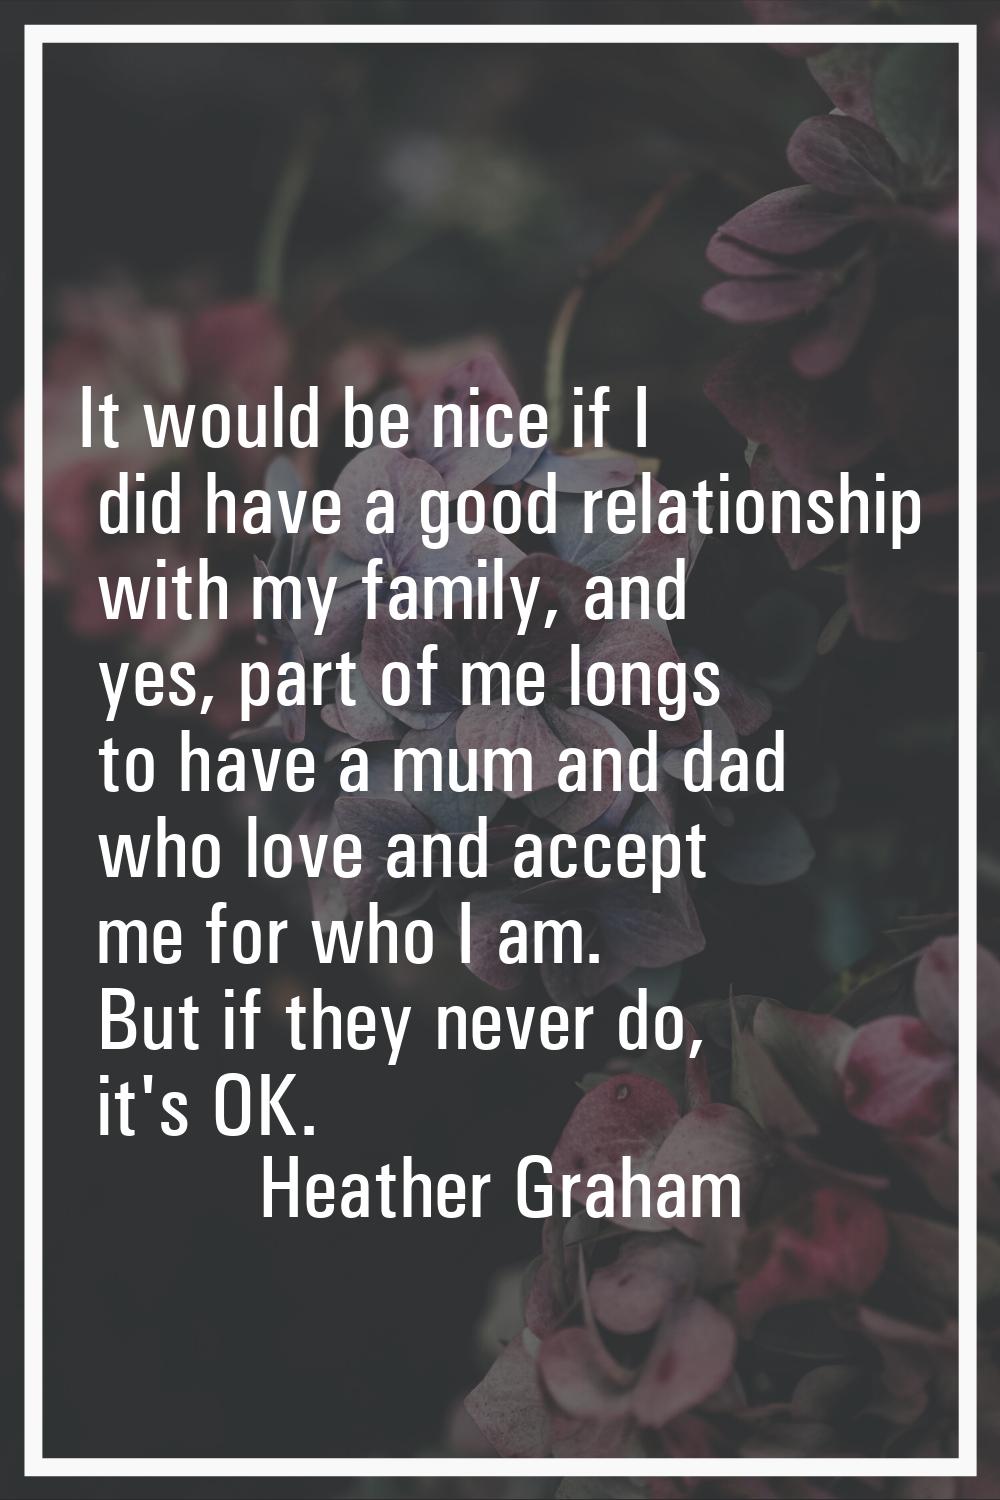 It would be nice if I did have a good relationship with my family, and yes, part of me longs to hav